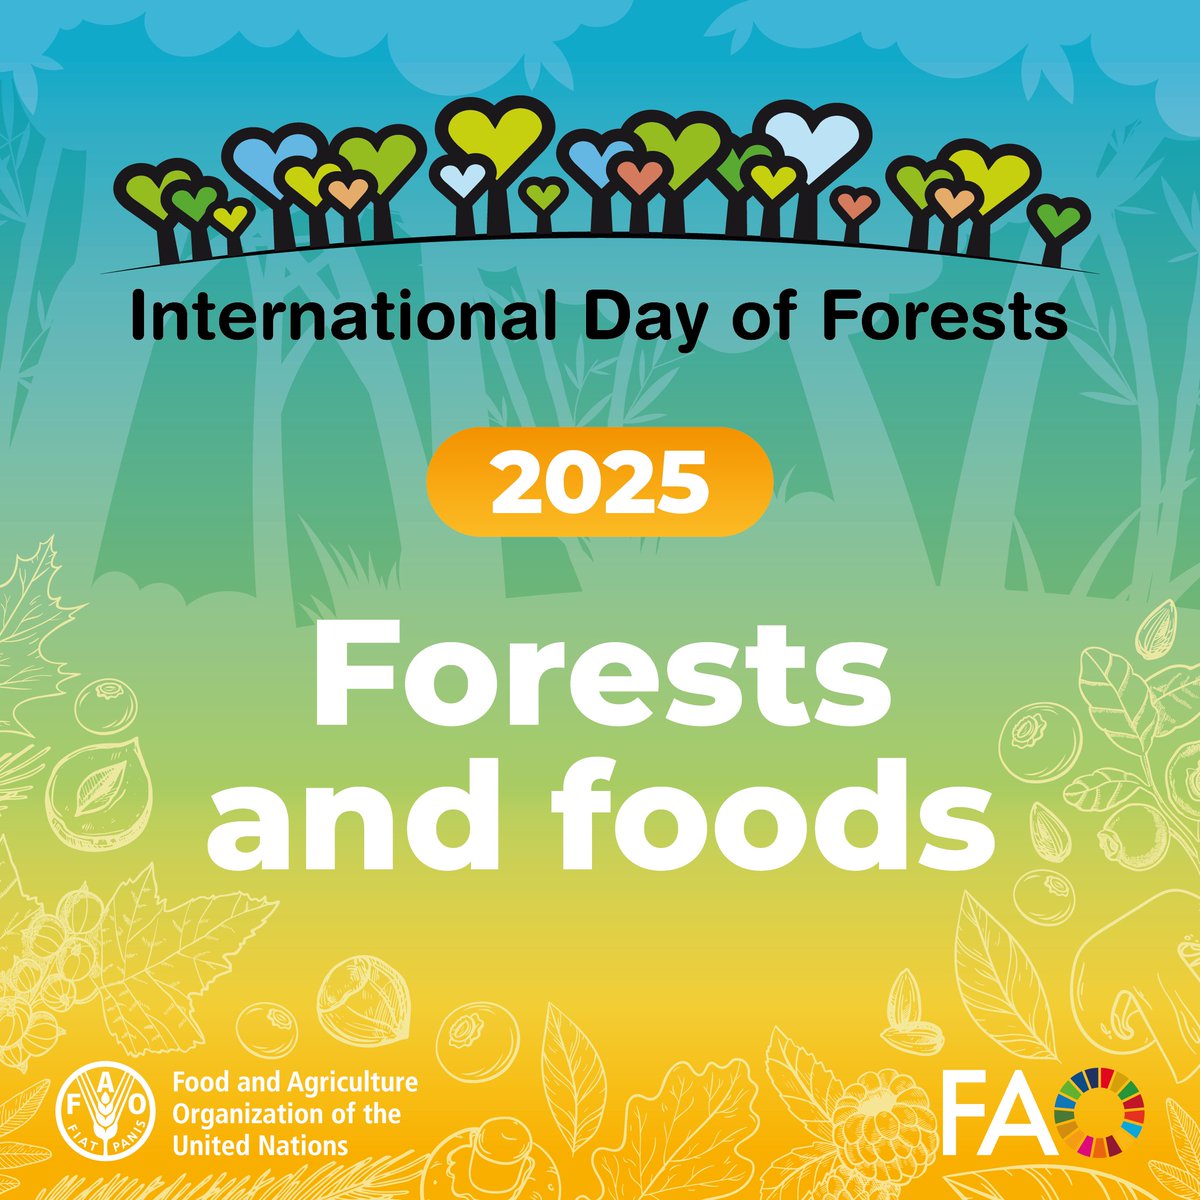 Mark your calendars! The theme for the International Day of Forests 2025 is 'Forests and Foods’. Stay tuned for ways to celebrate the vital role forests play in sustaining our food systems. #ForestDay #IntlForestDay #ForestsFeedUs #CPForests #UNFF19